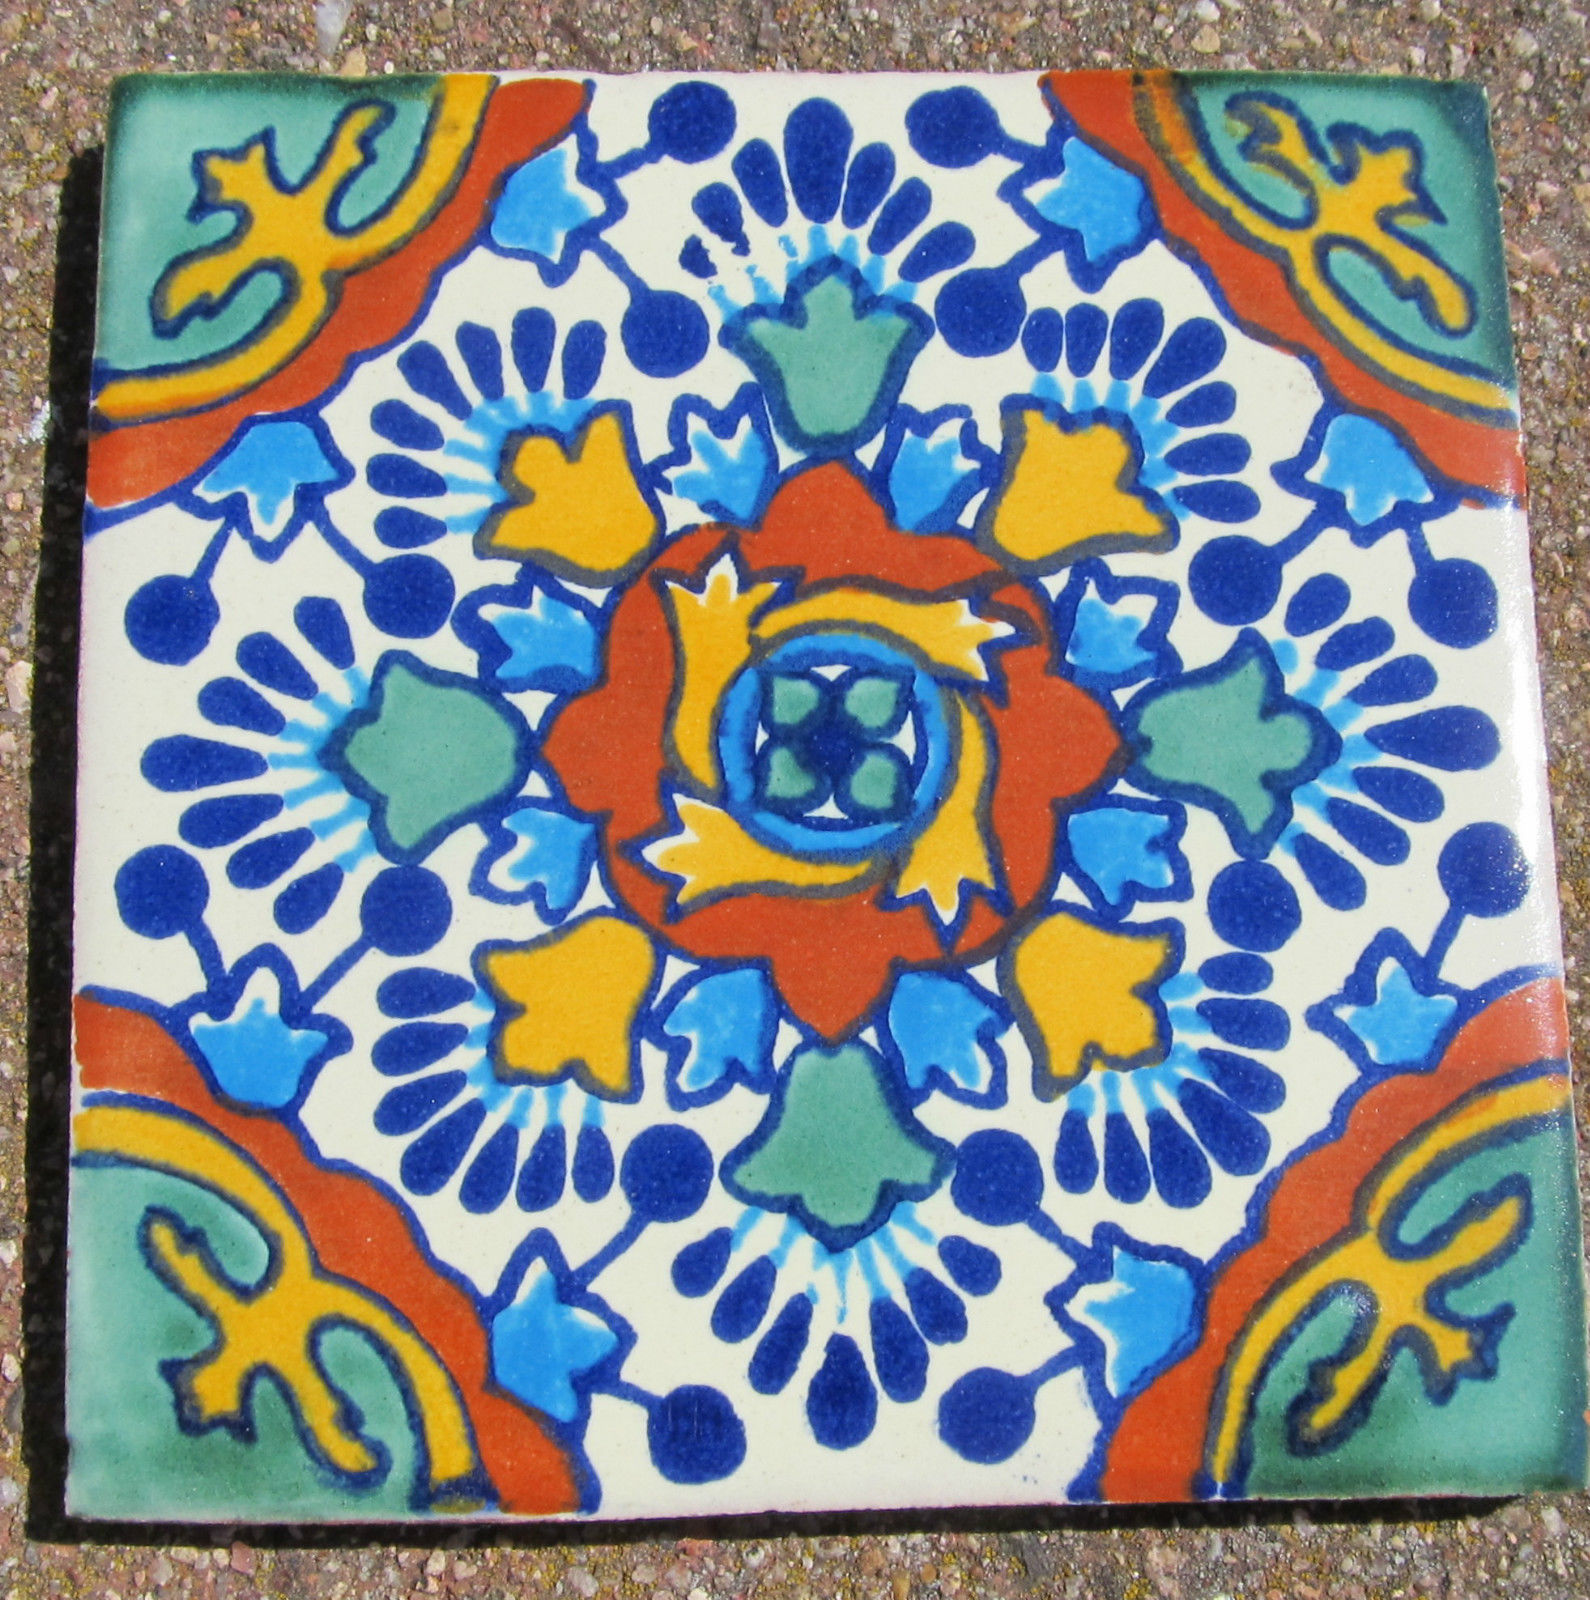 Spanish Tile Design Of the tile pictured above